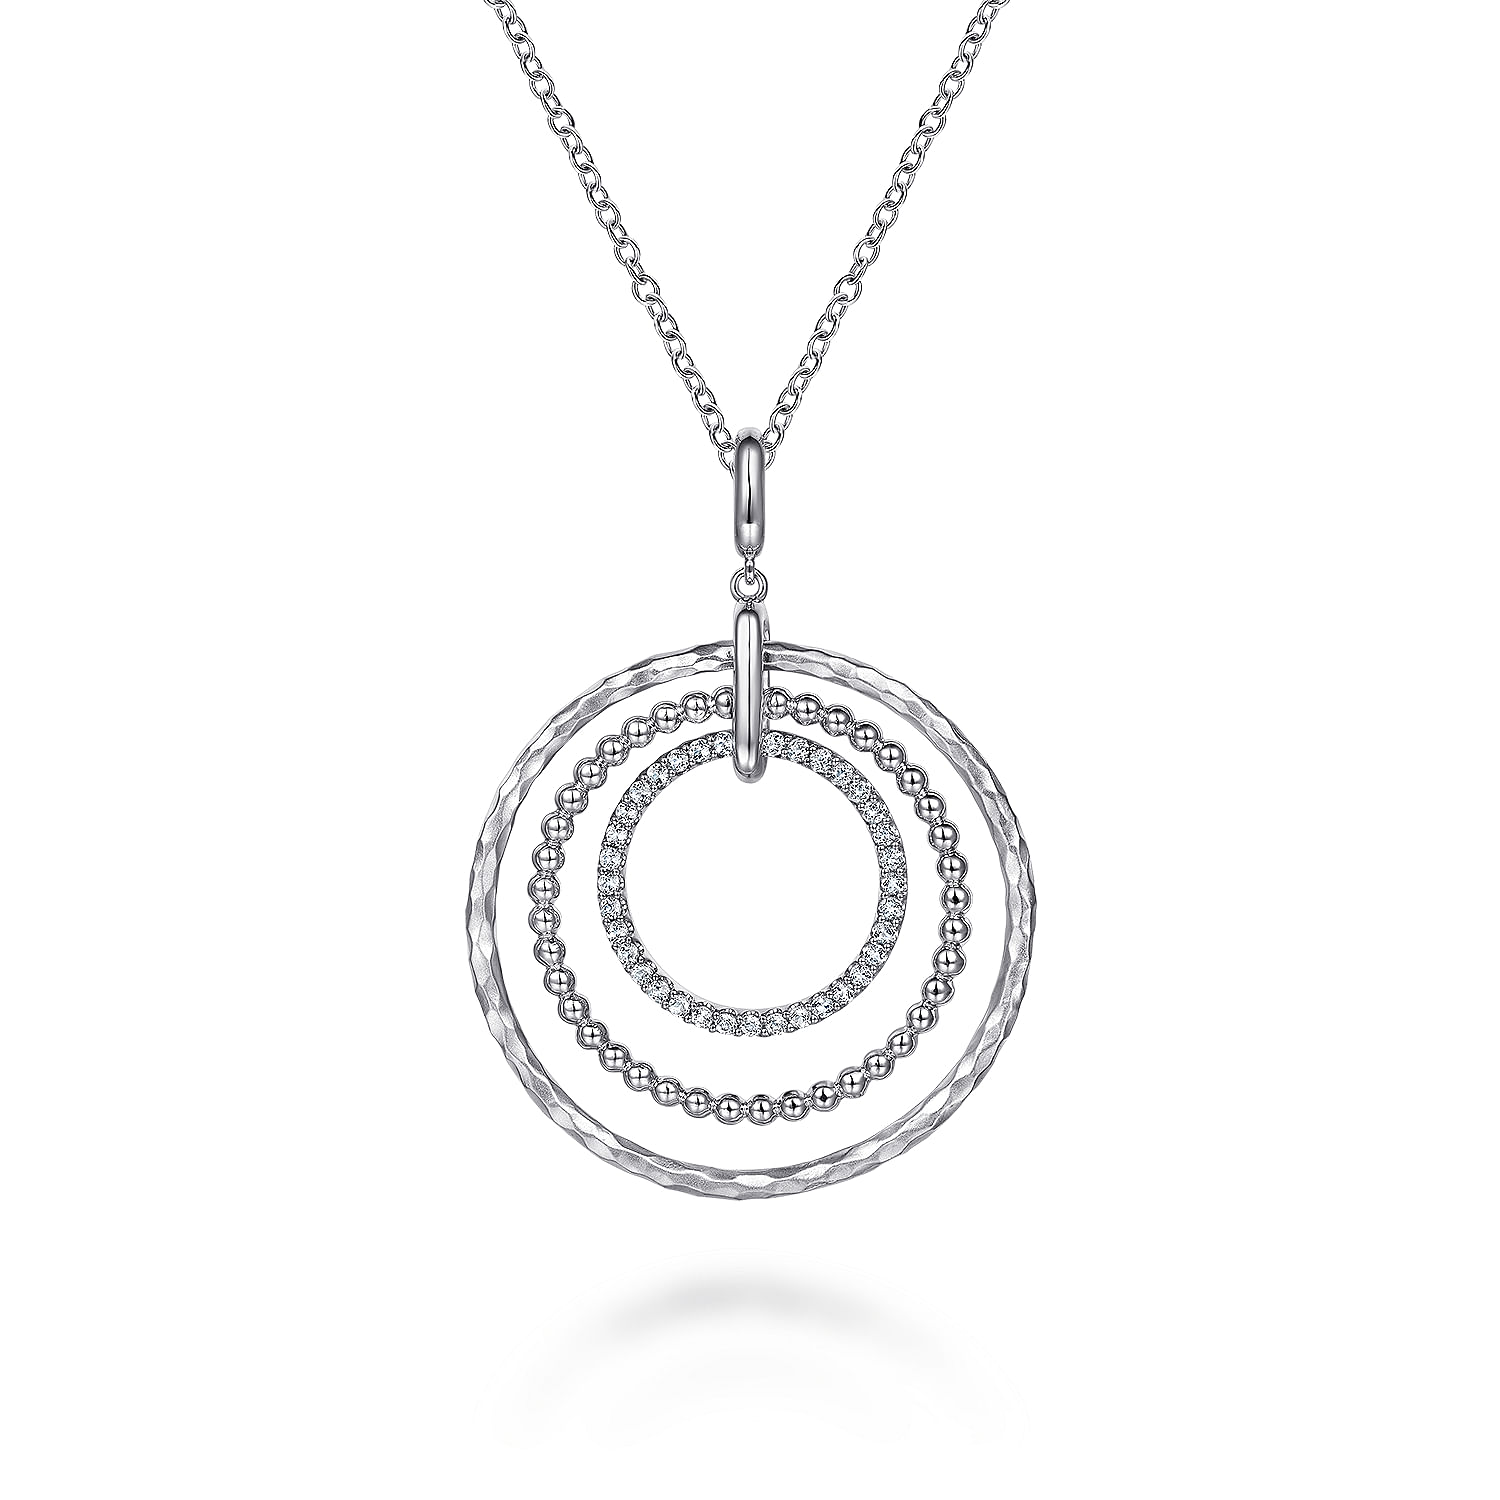 24 inch 925 Sterling Silver Triple Row Circle Pendant Necklace with White Sapphire